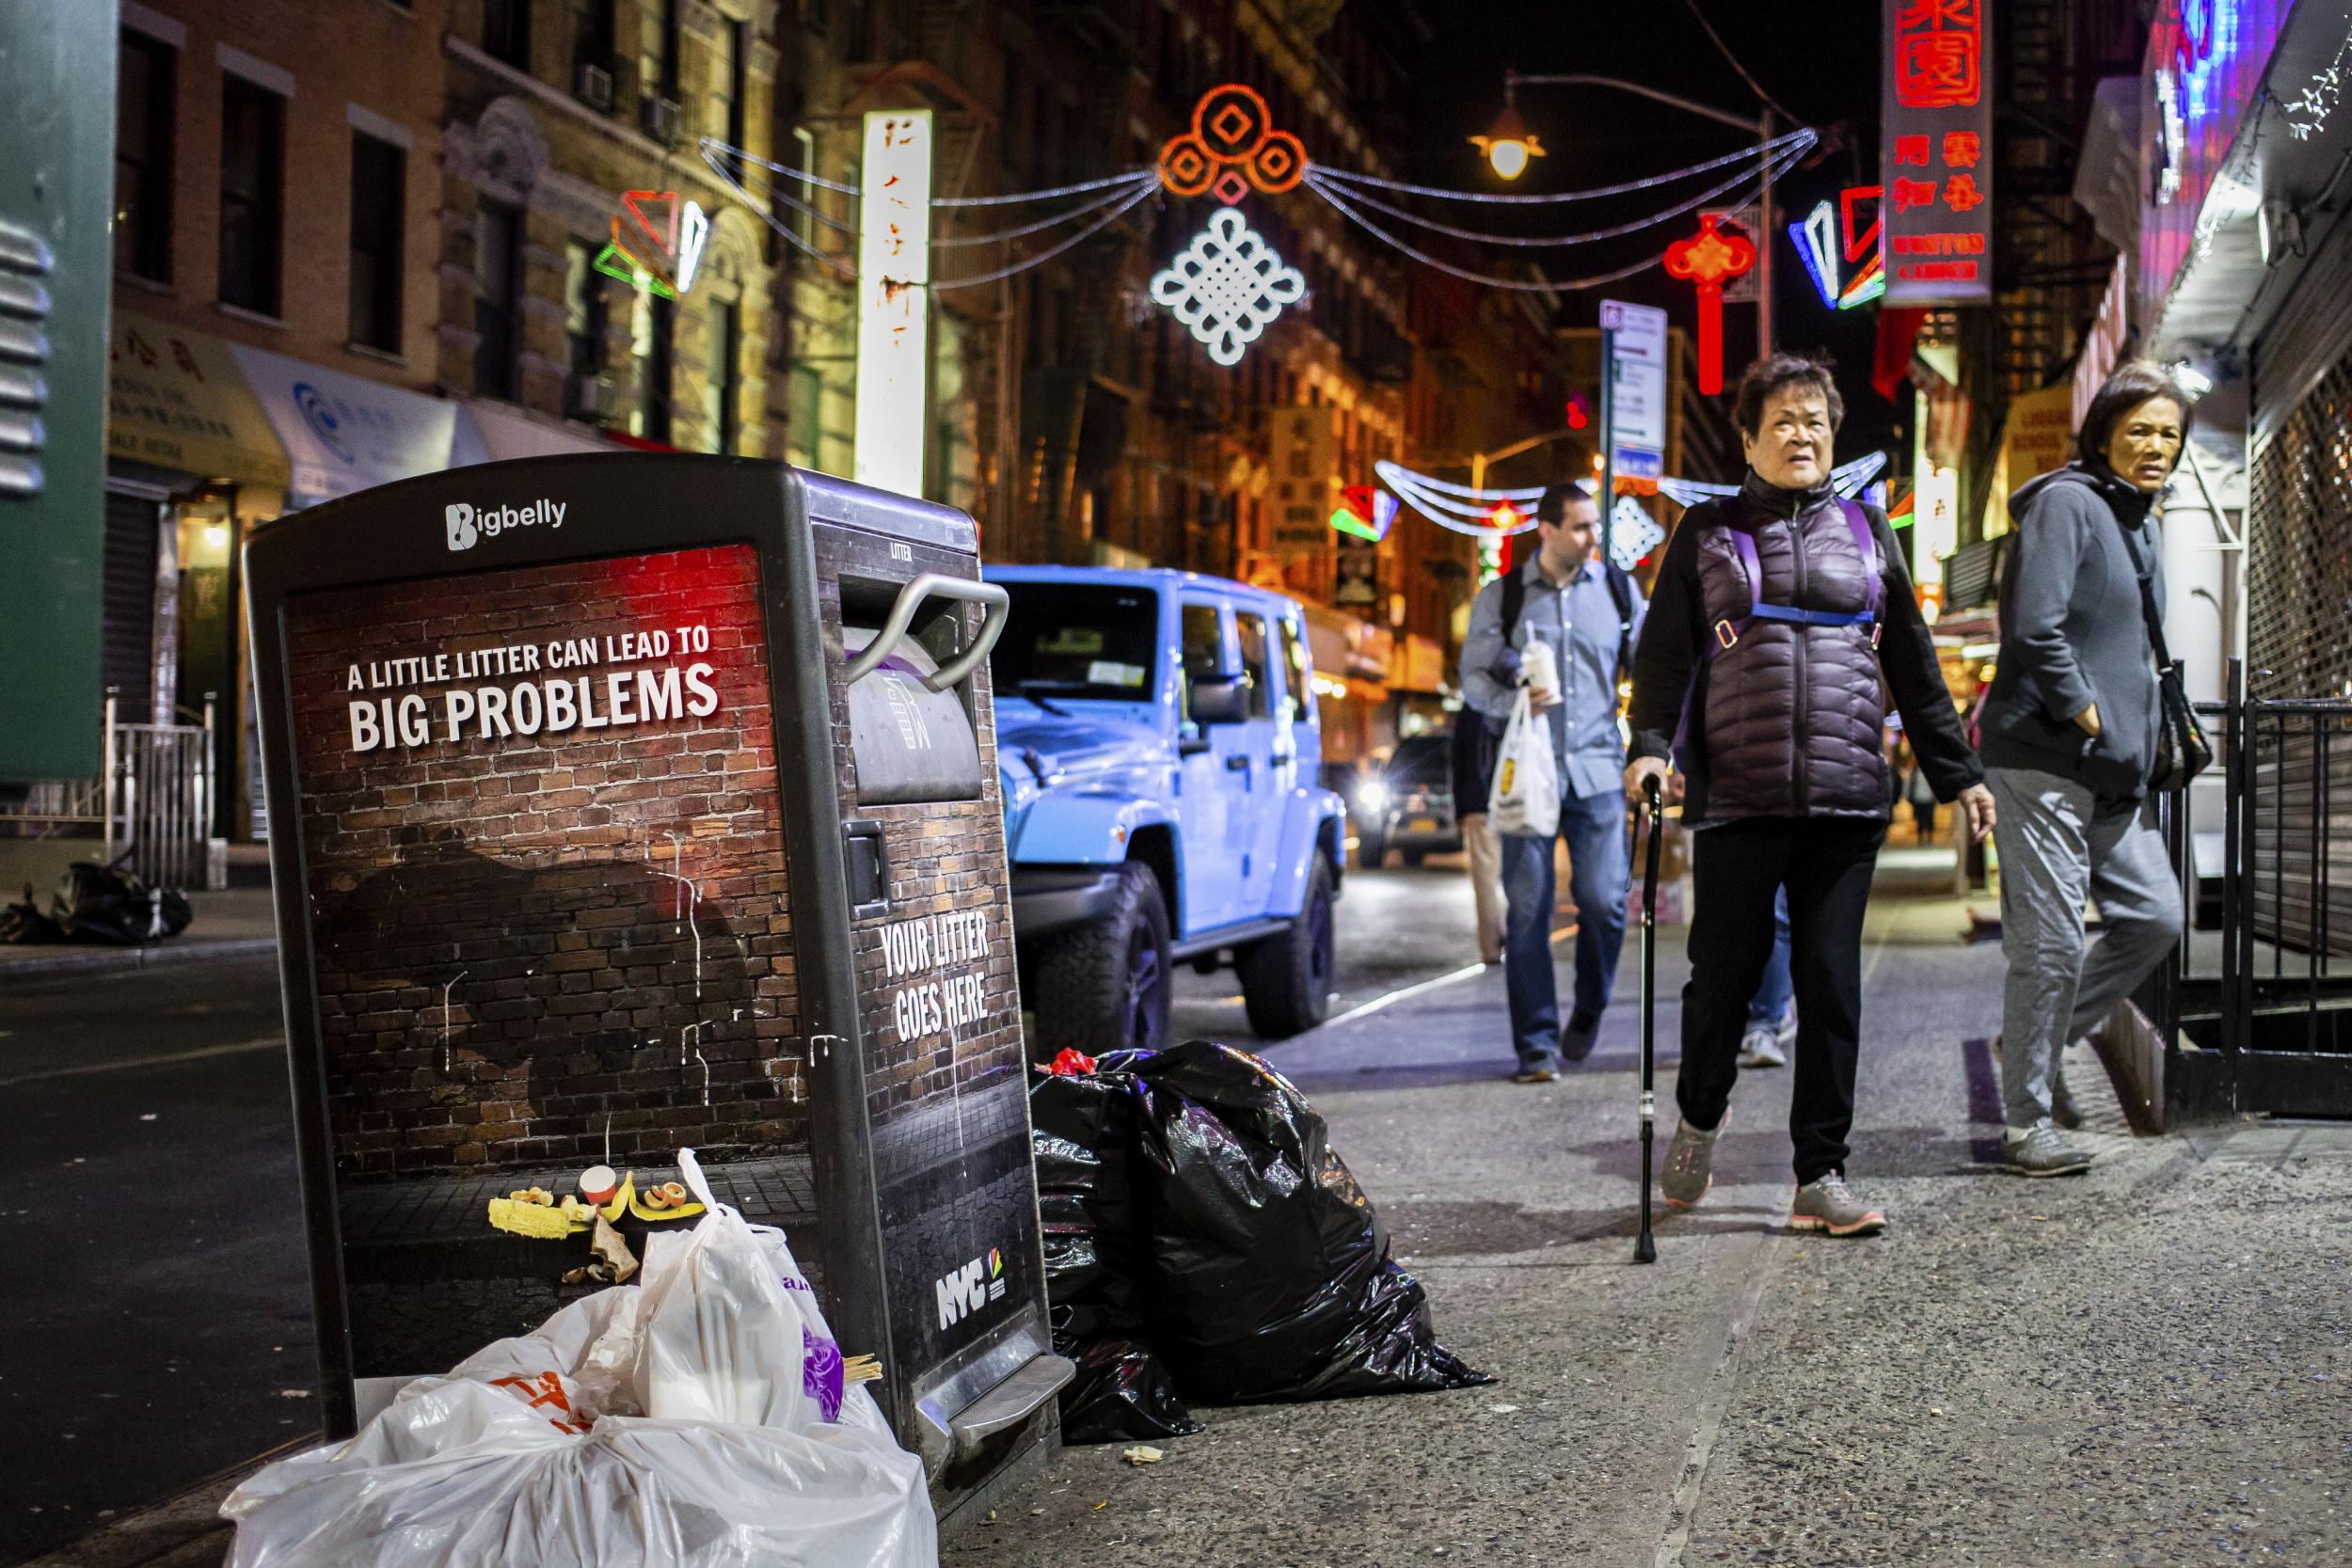 Bin in New York's Chinatown warns 'a little litter can lead to big problems'